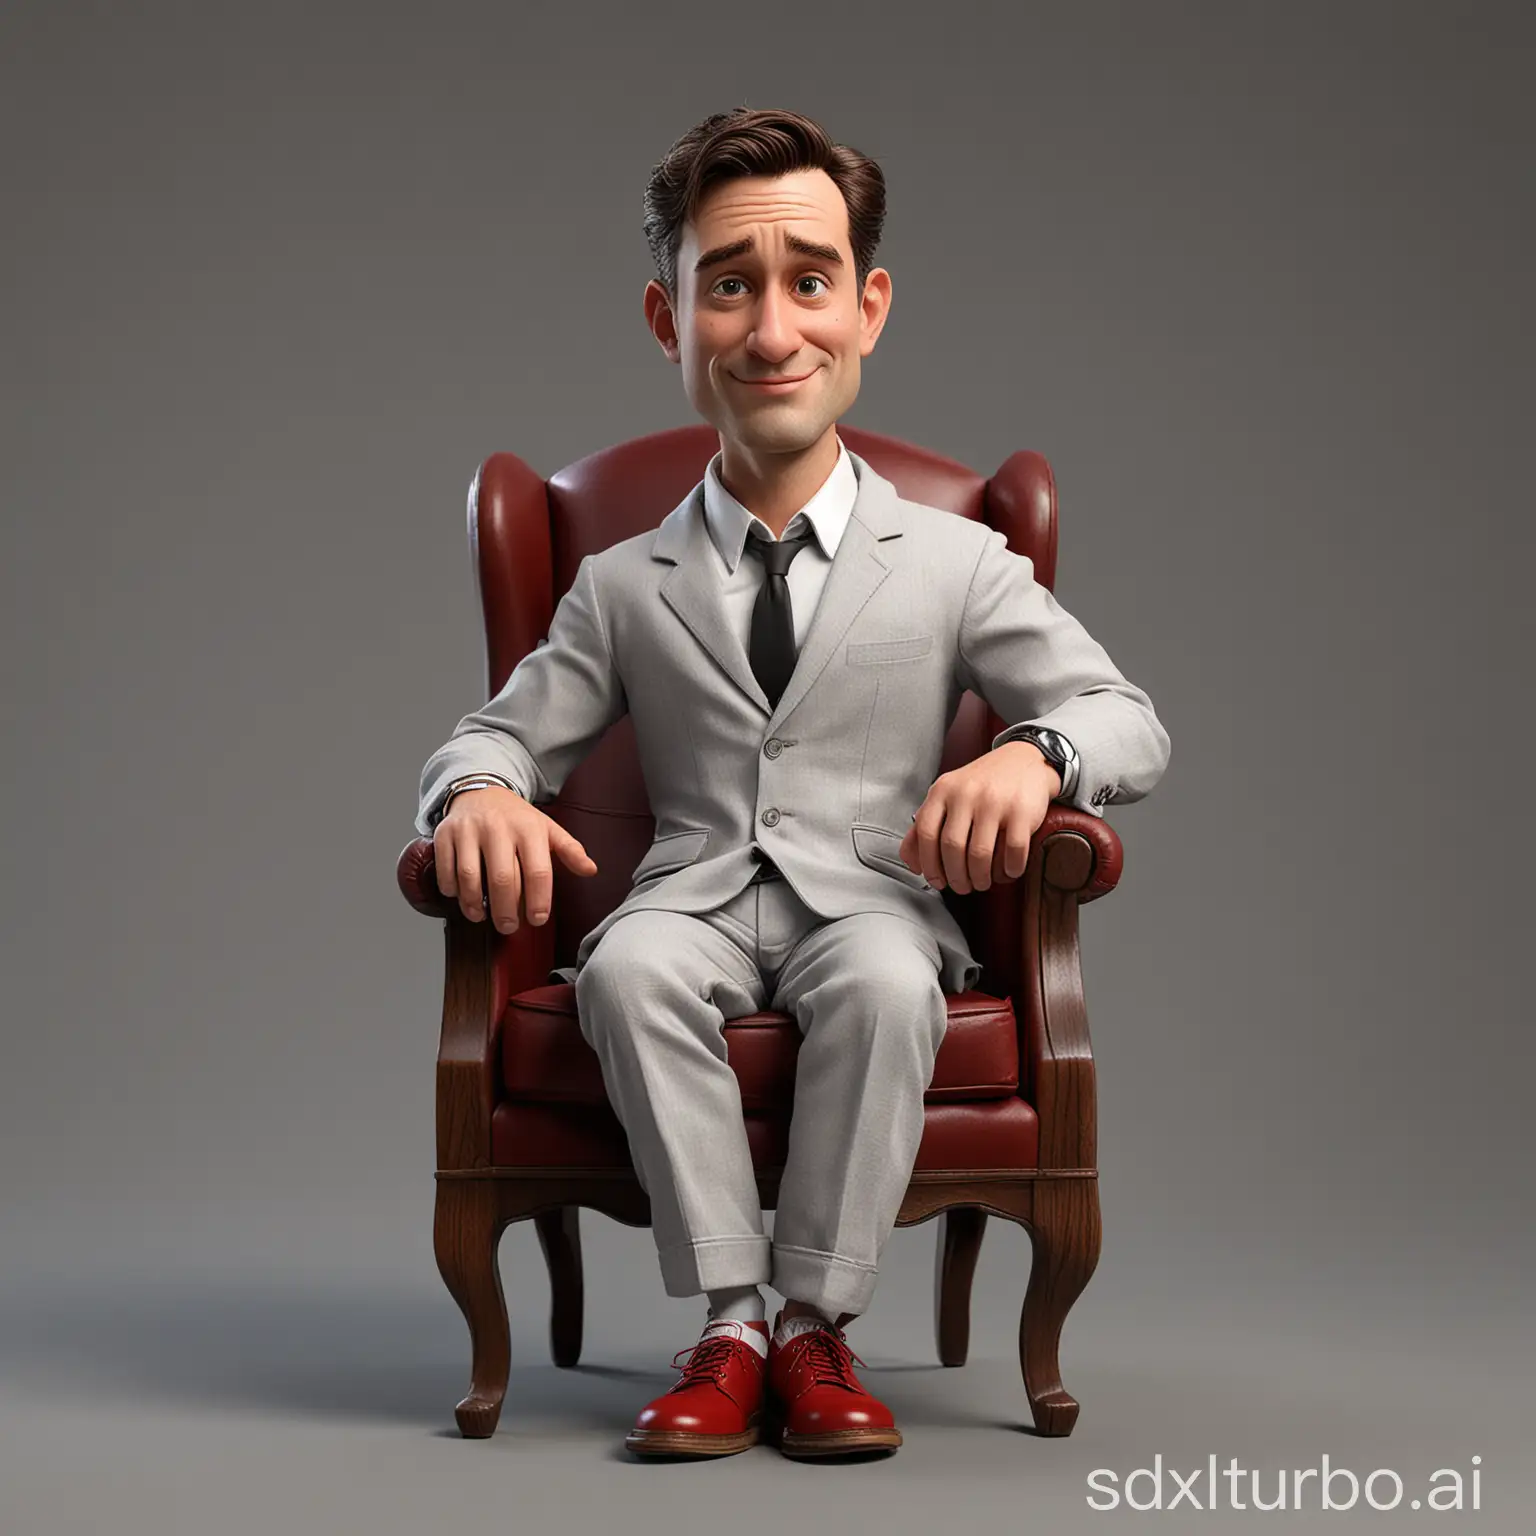 Create a caricature 3D Realistic Disney pixar style full body with a big head. A 40 year old male photographer, is sitting relaxed in a classic dark red wingback wooden chair, the wood texture is clear. Wearing a white t-shirt covered with a gray suit, wearing gray cloth trousers. Wearing white shoes sneakers. Sit with your legs crossed, your right hand holding a camera Leica M6, your left hand placed on the edge of the chair. The background should contrast with the color of the chair and clothing, enhancing the overall composition of the picture. Use soft photography lighting, dramatic overhead lighting, very high image quality, clear character details, UHD, 16k.